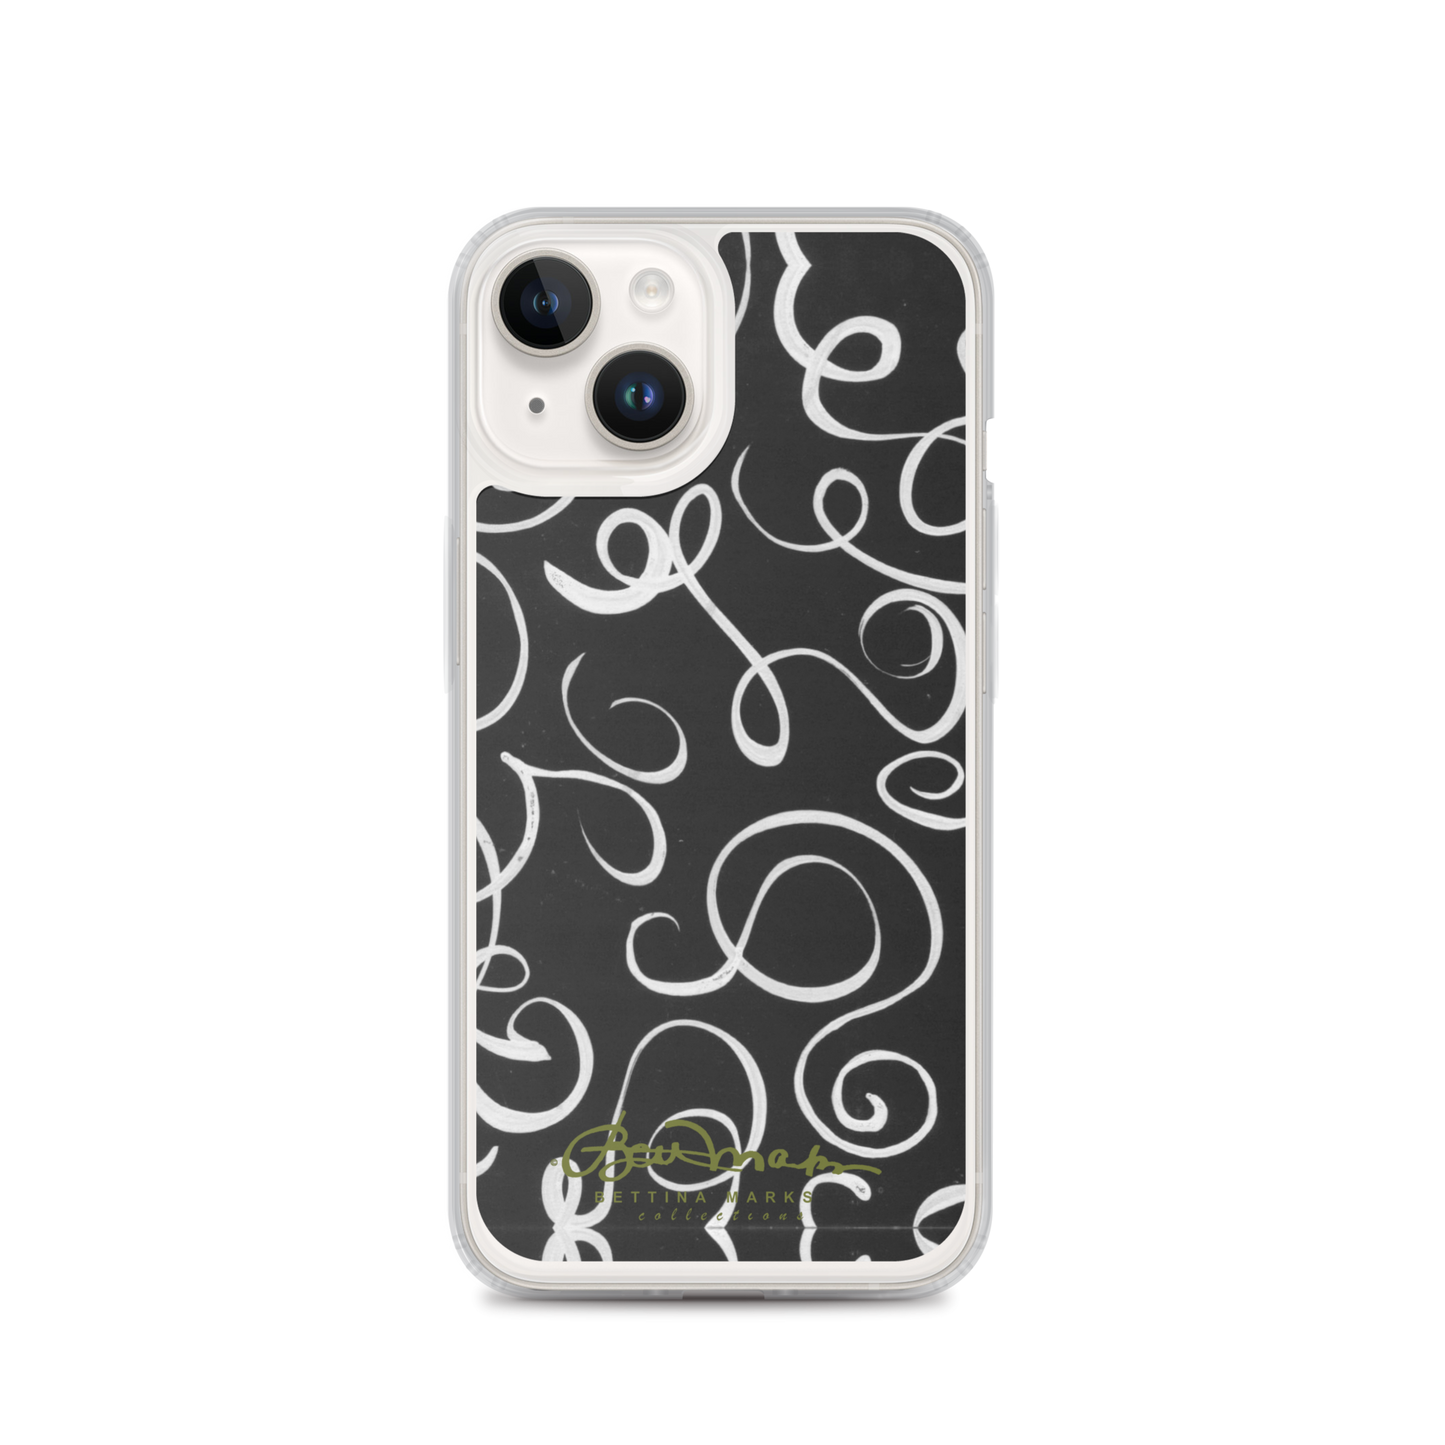 B&W Squiggles iPhone Case (select model)